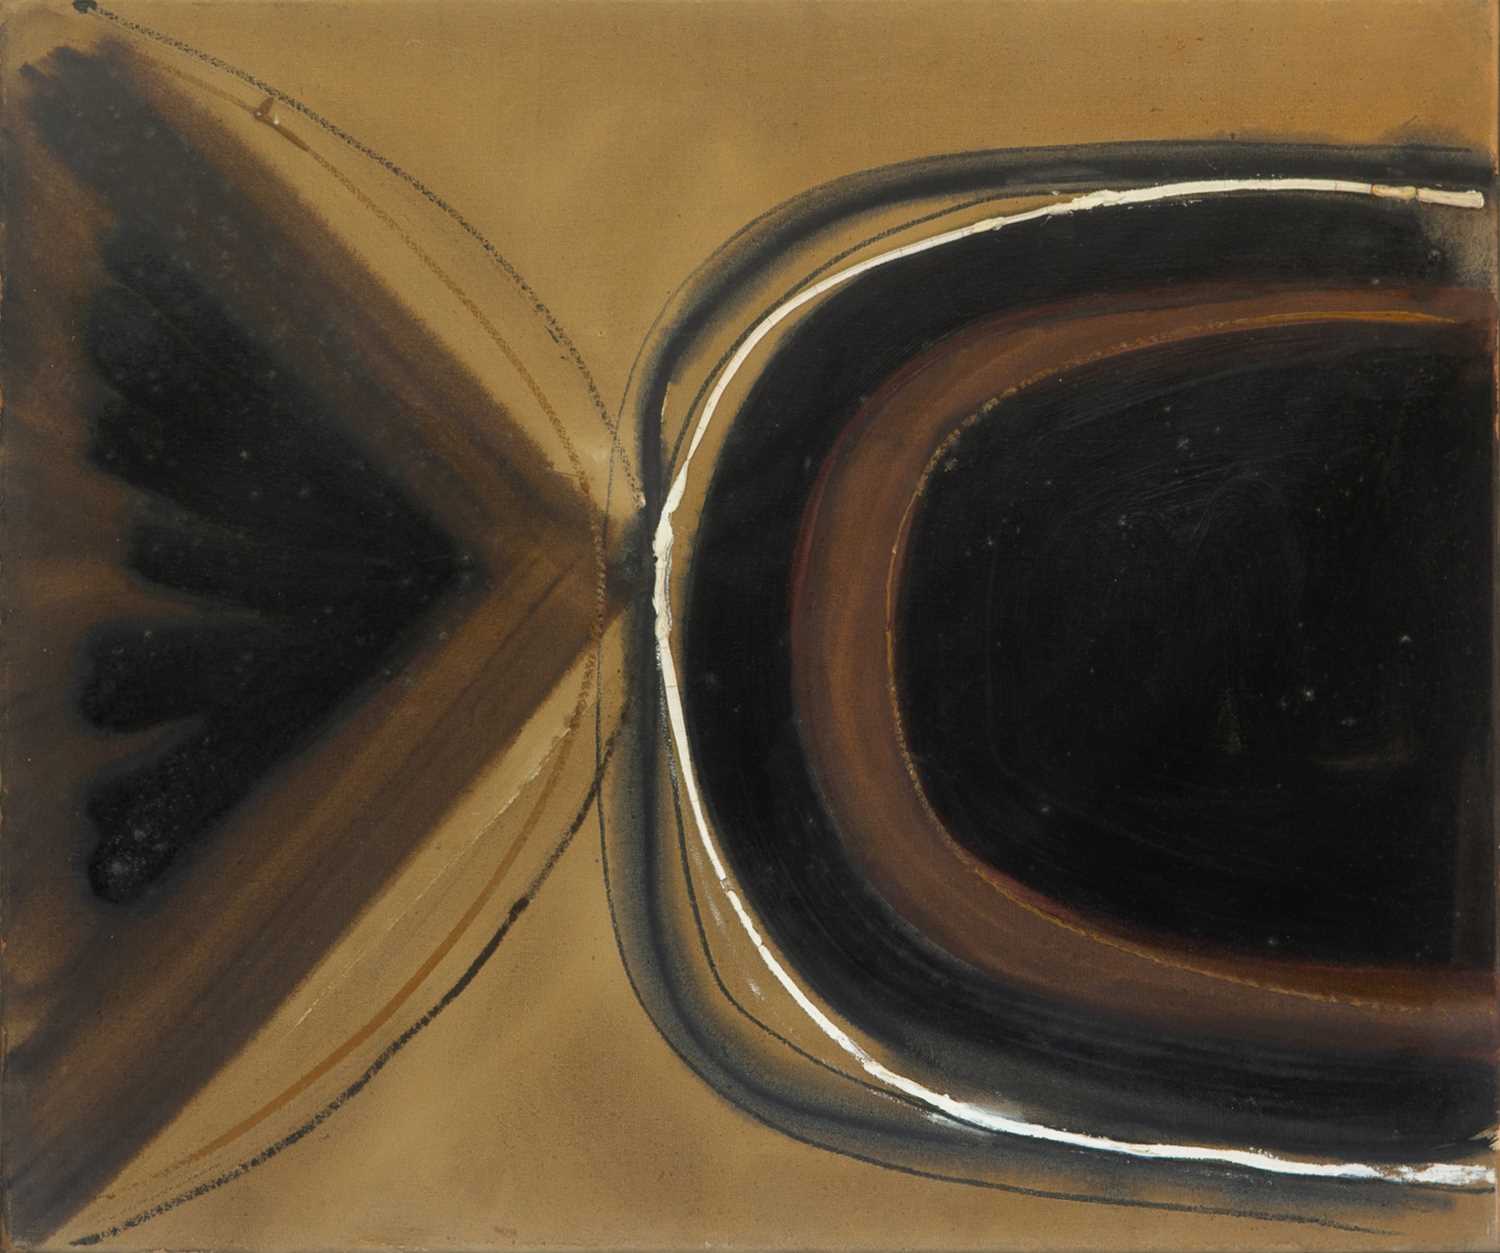 Terry FROST (1915- 2003) Umber and Ochre, 1961